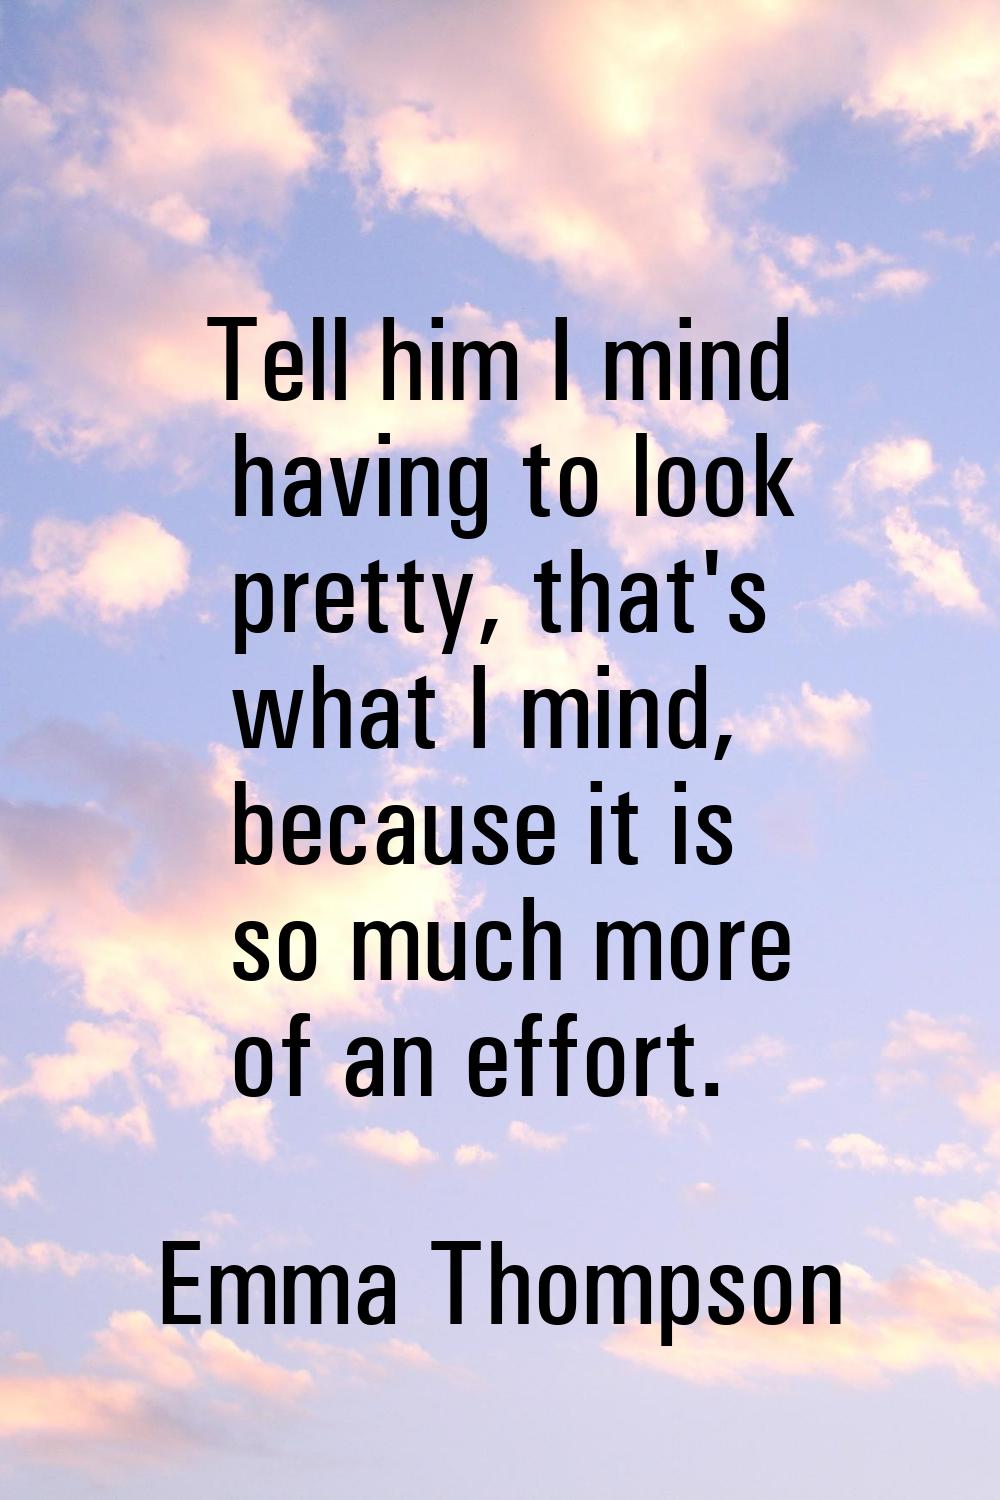 Tell him I mind having to look pretty, that's what I mind, because it is so much more of an effort.